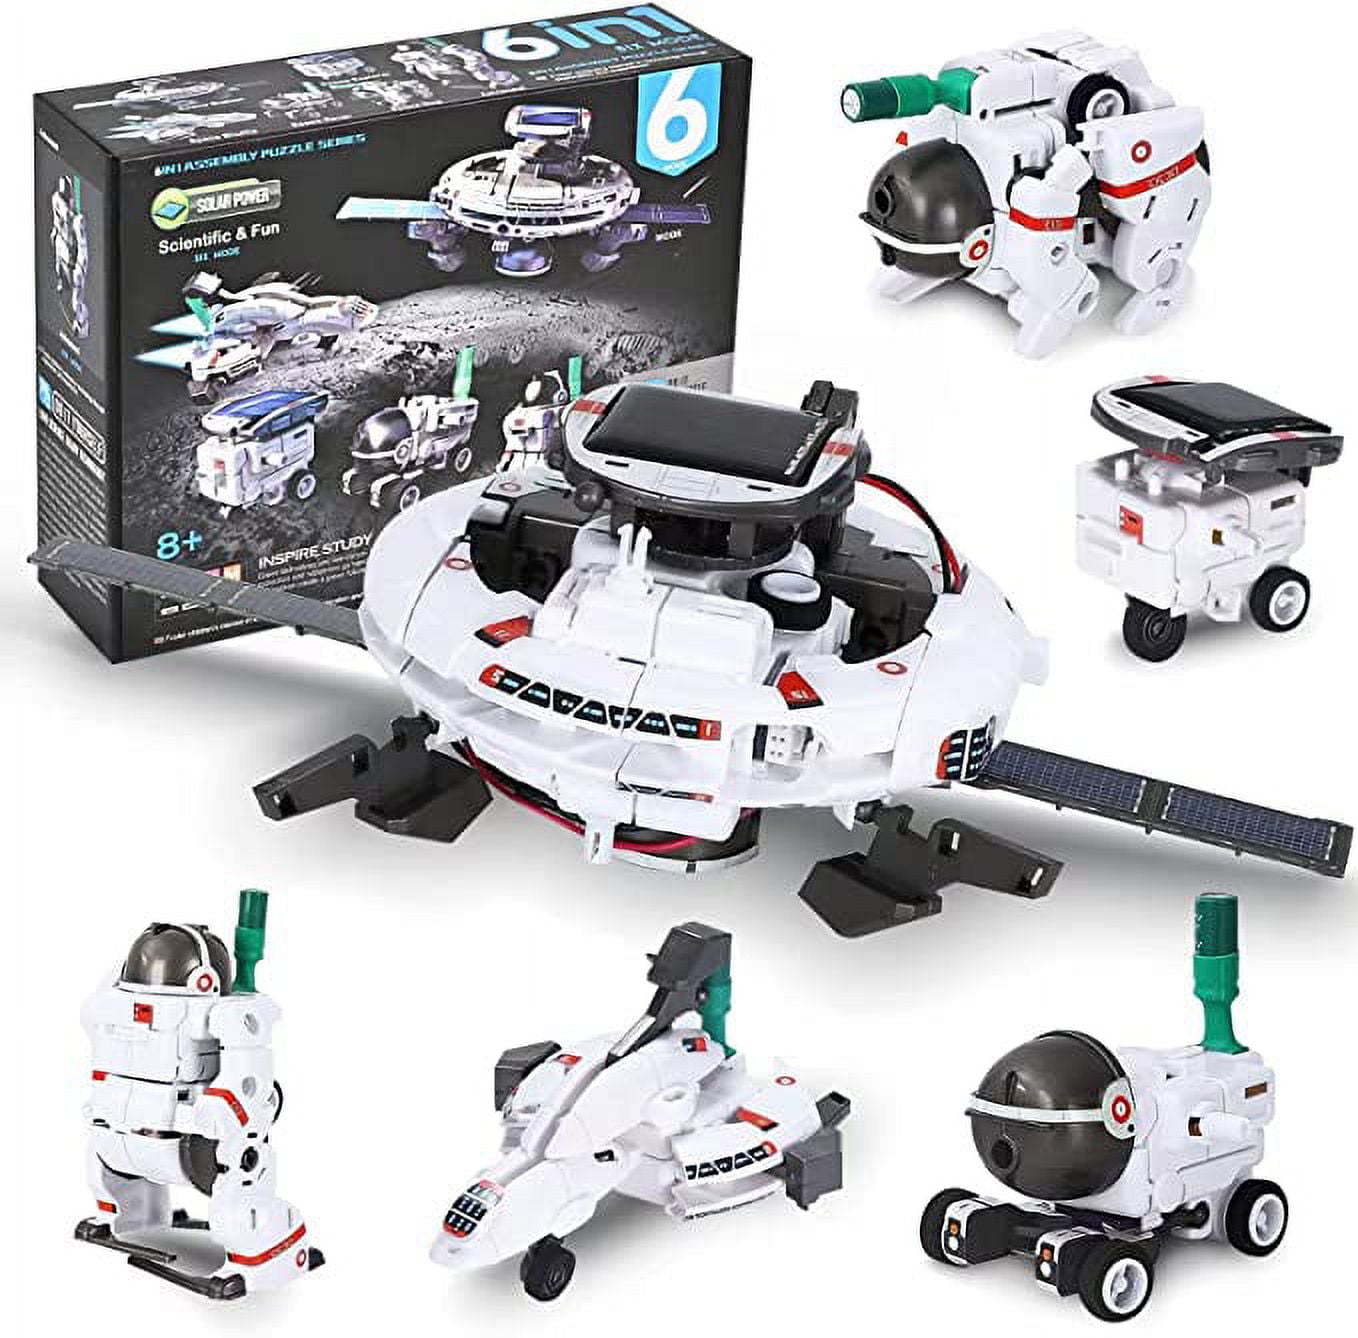 Space Science Craft Kit Gift 6-in-1, Arts Crafts Space Toy for Kids Ages 6-8, Gifts for Boys and Girls Aged 6,7,8,9,10 Year Olds, Solar System Toys  for Kids